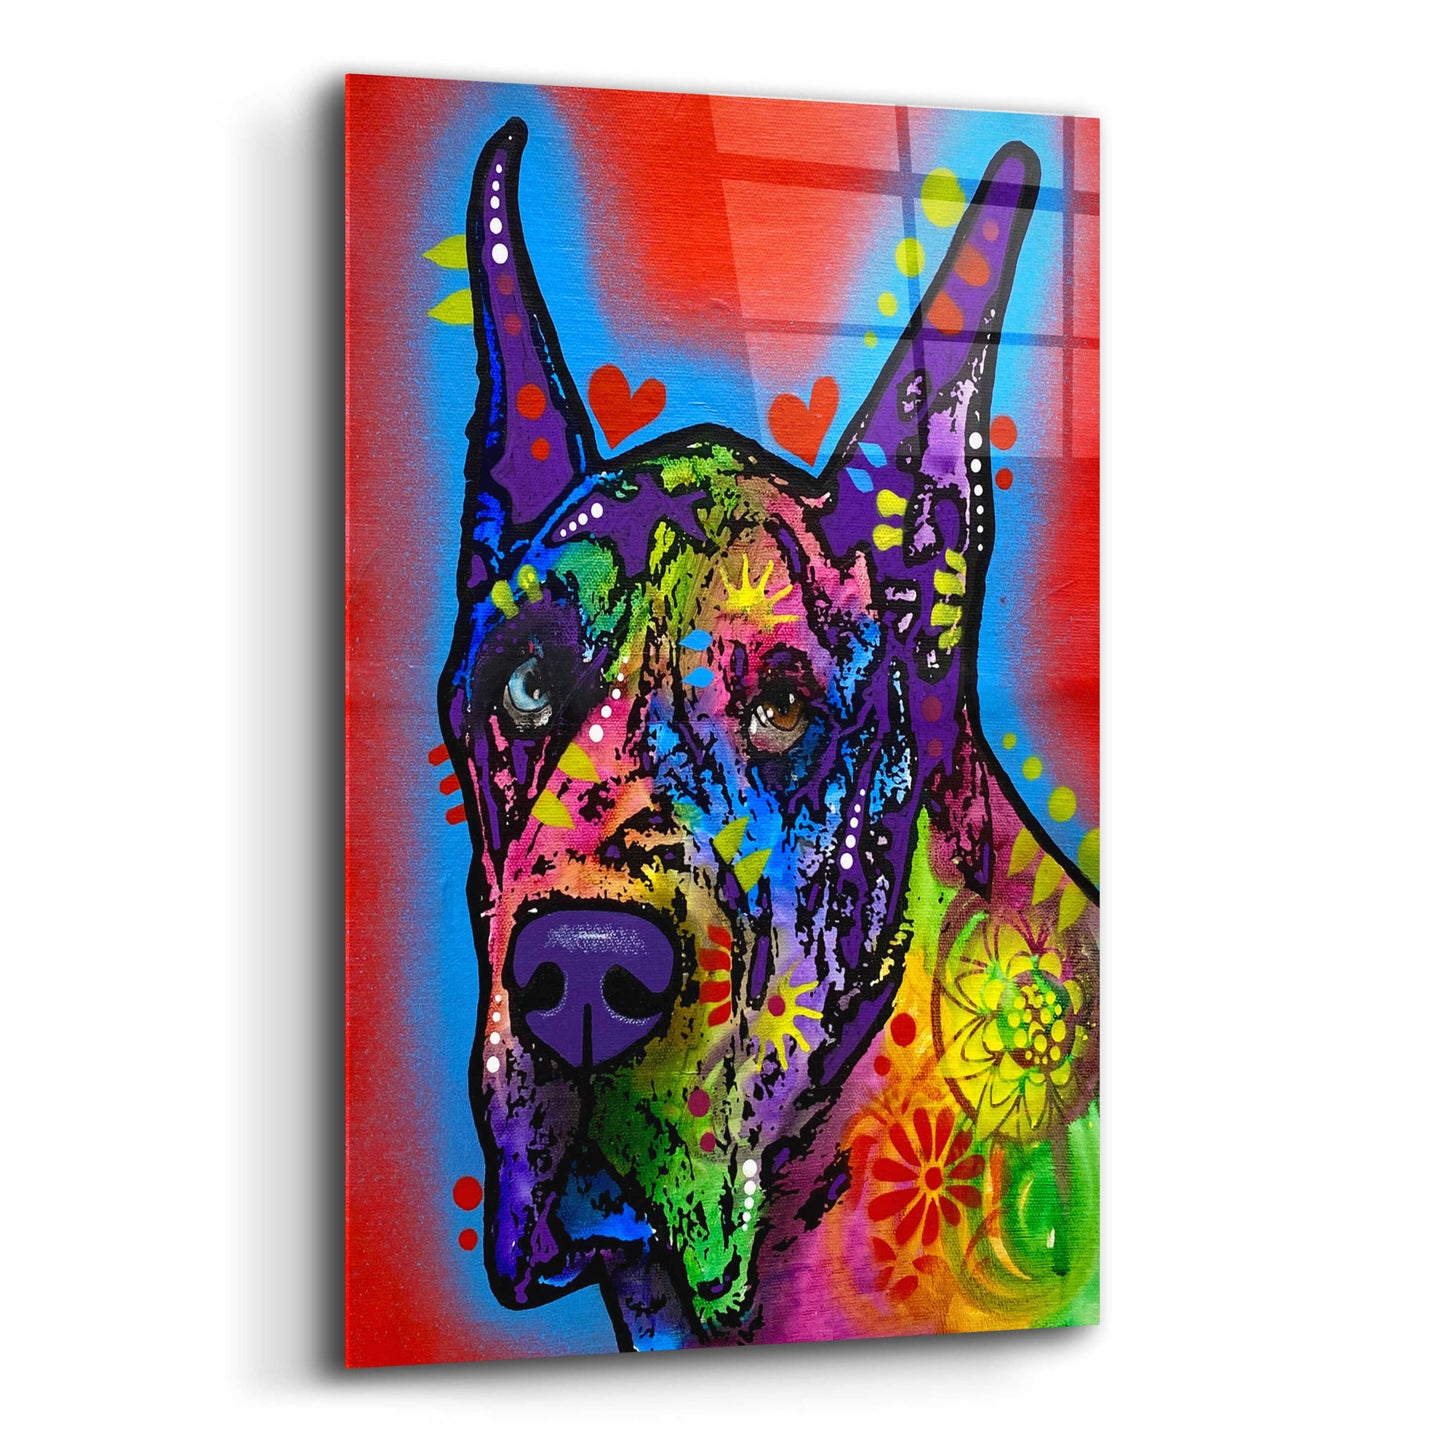 Epic Art 'Not This Again' by Dean Russo, Acrylic Glass Wall Art,12x16